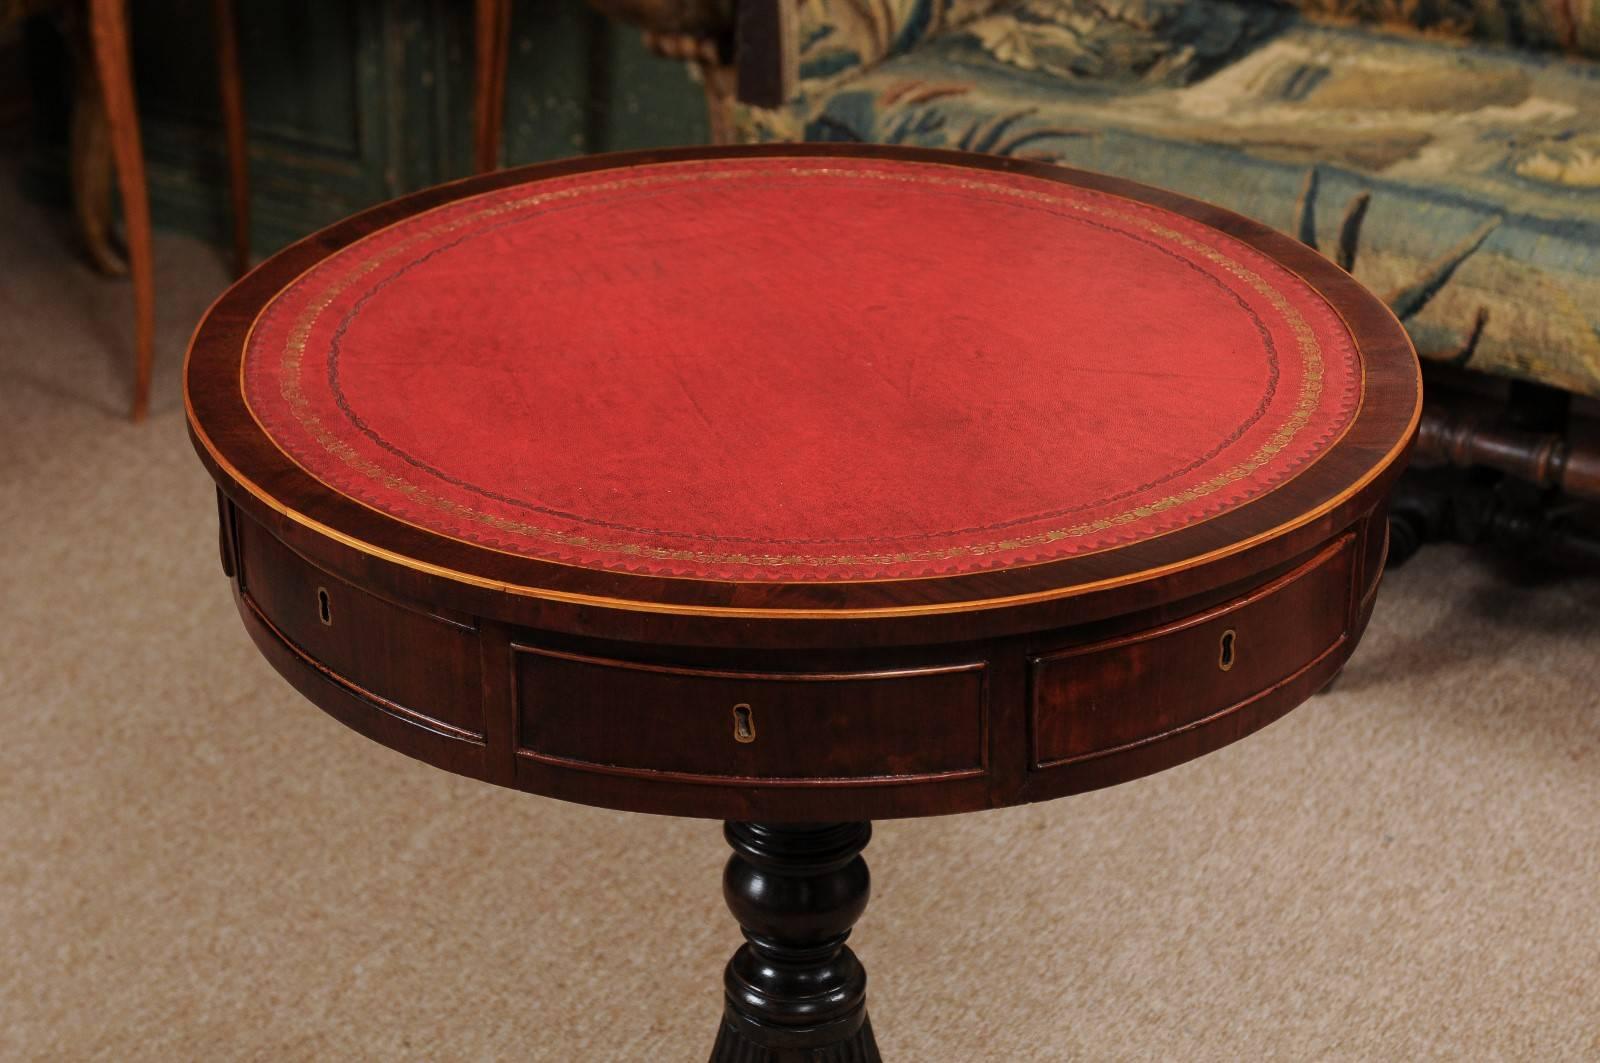 Brass Early 19th Century English Regency Revolving Drum Table with Red Leather Top